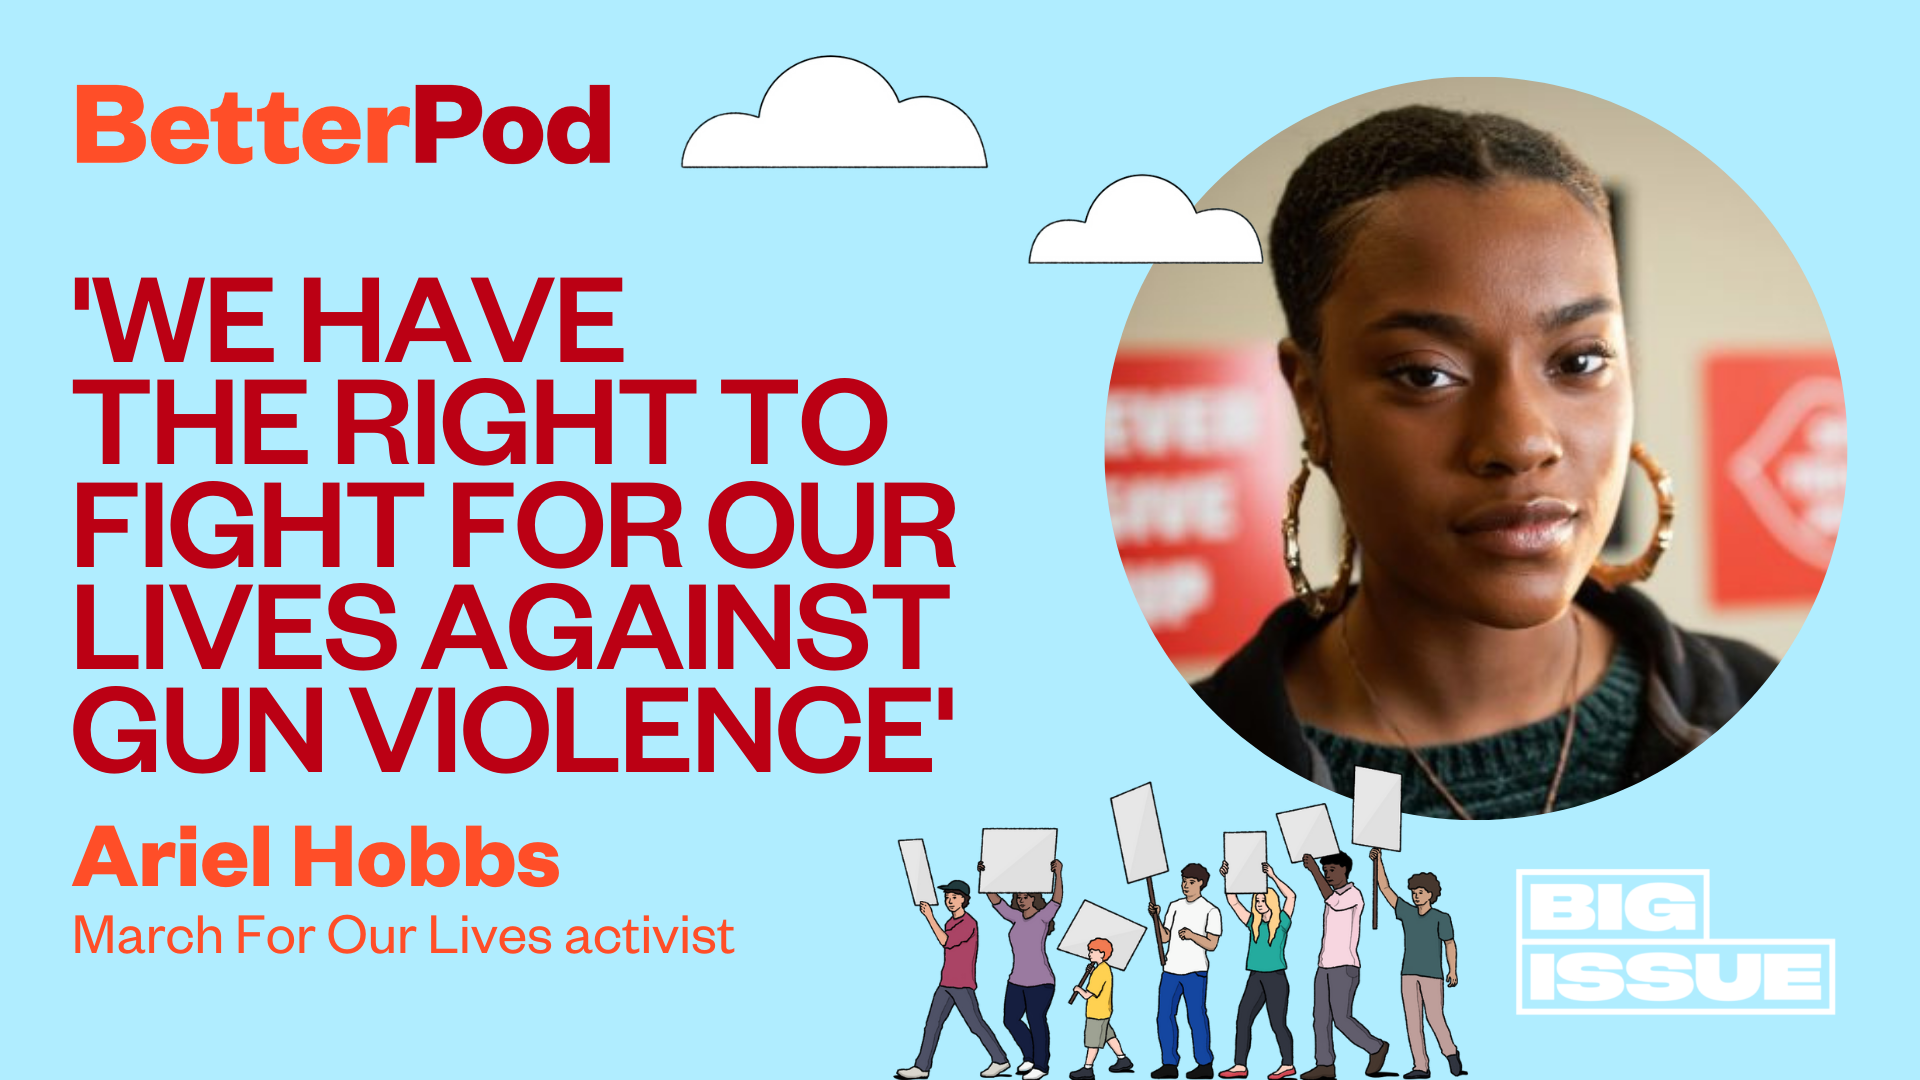 Ariel Hobbs from March For Our Lives on BetterPod